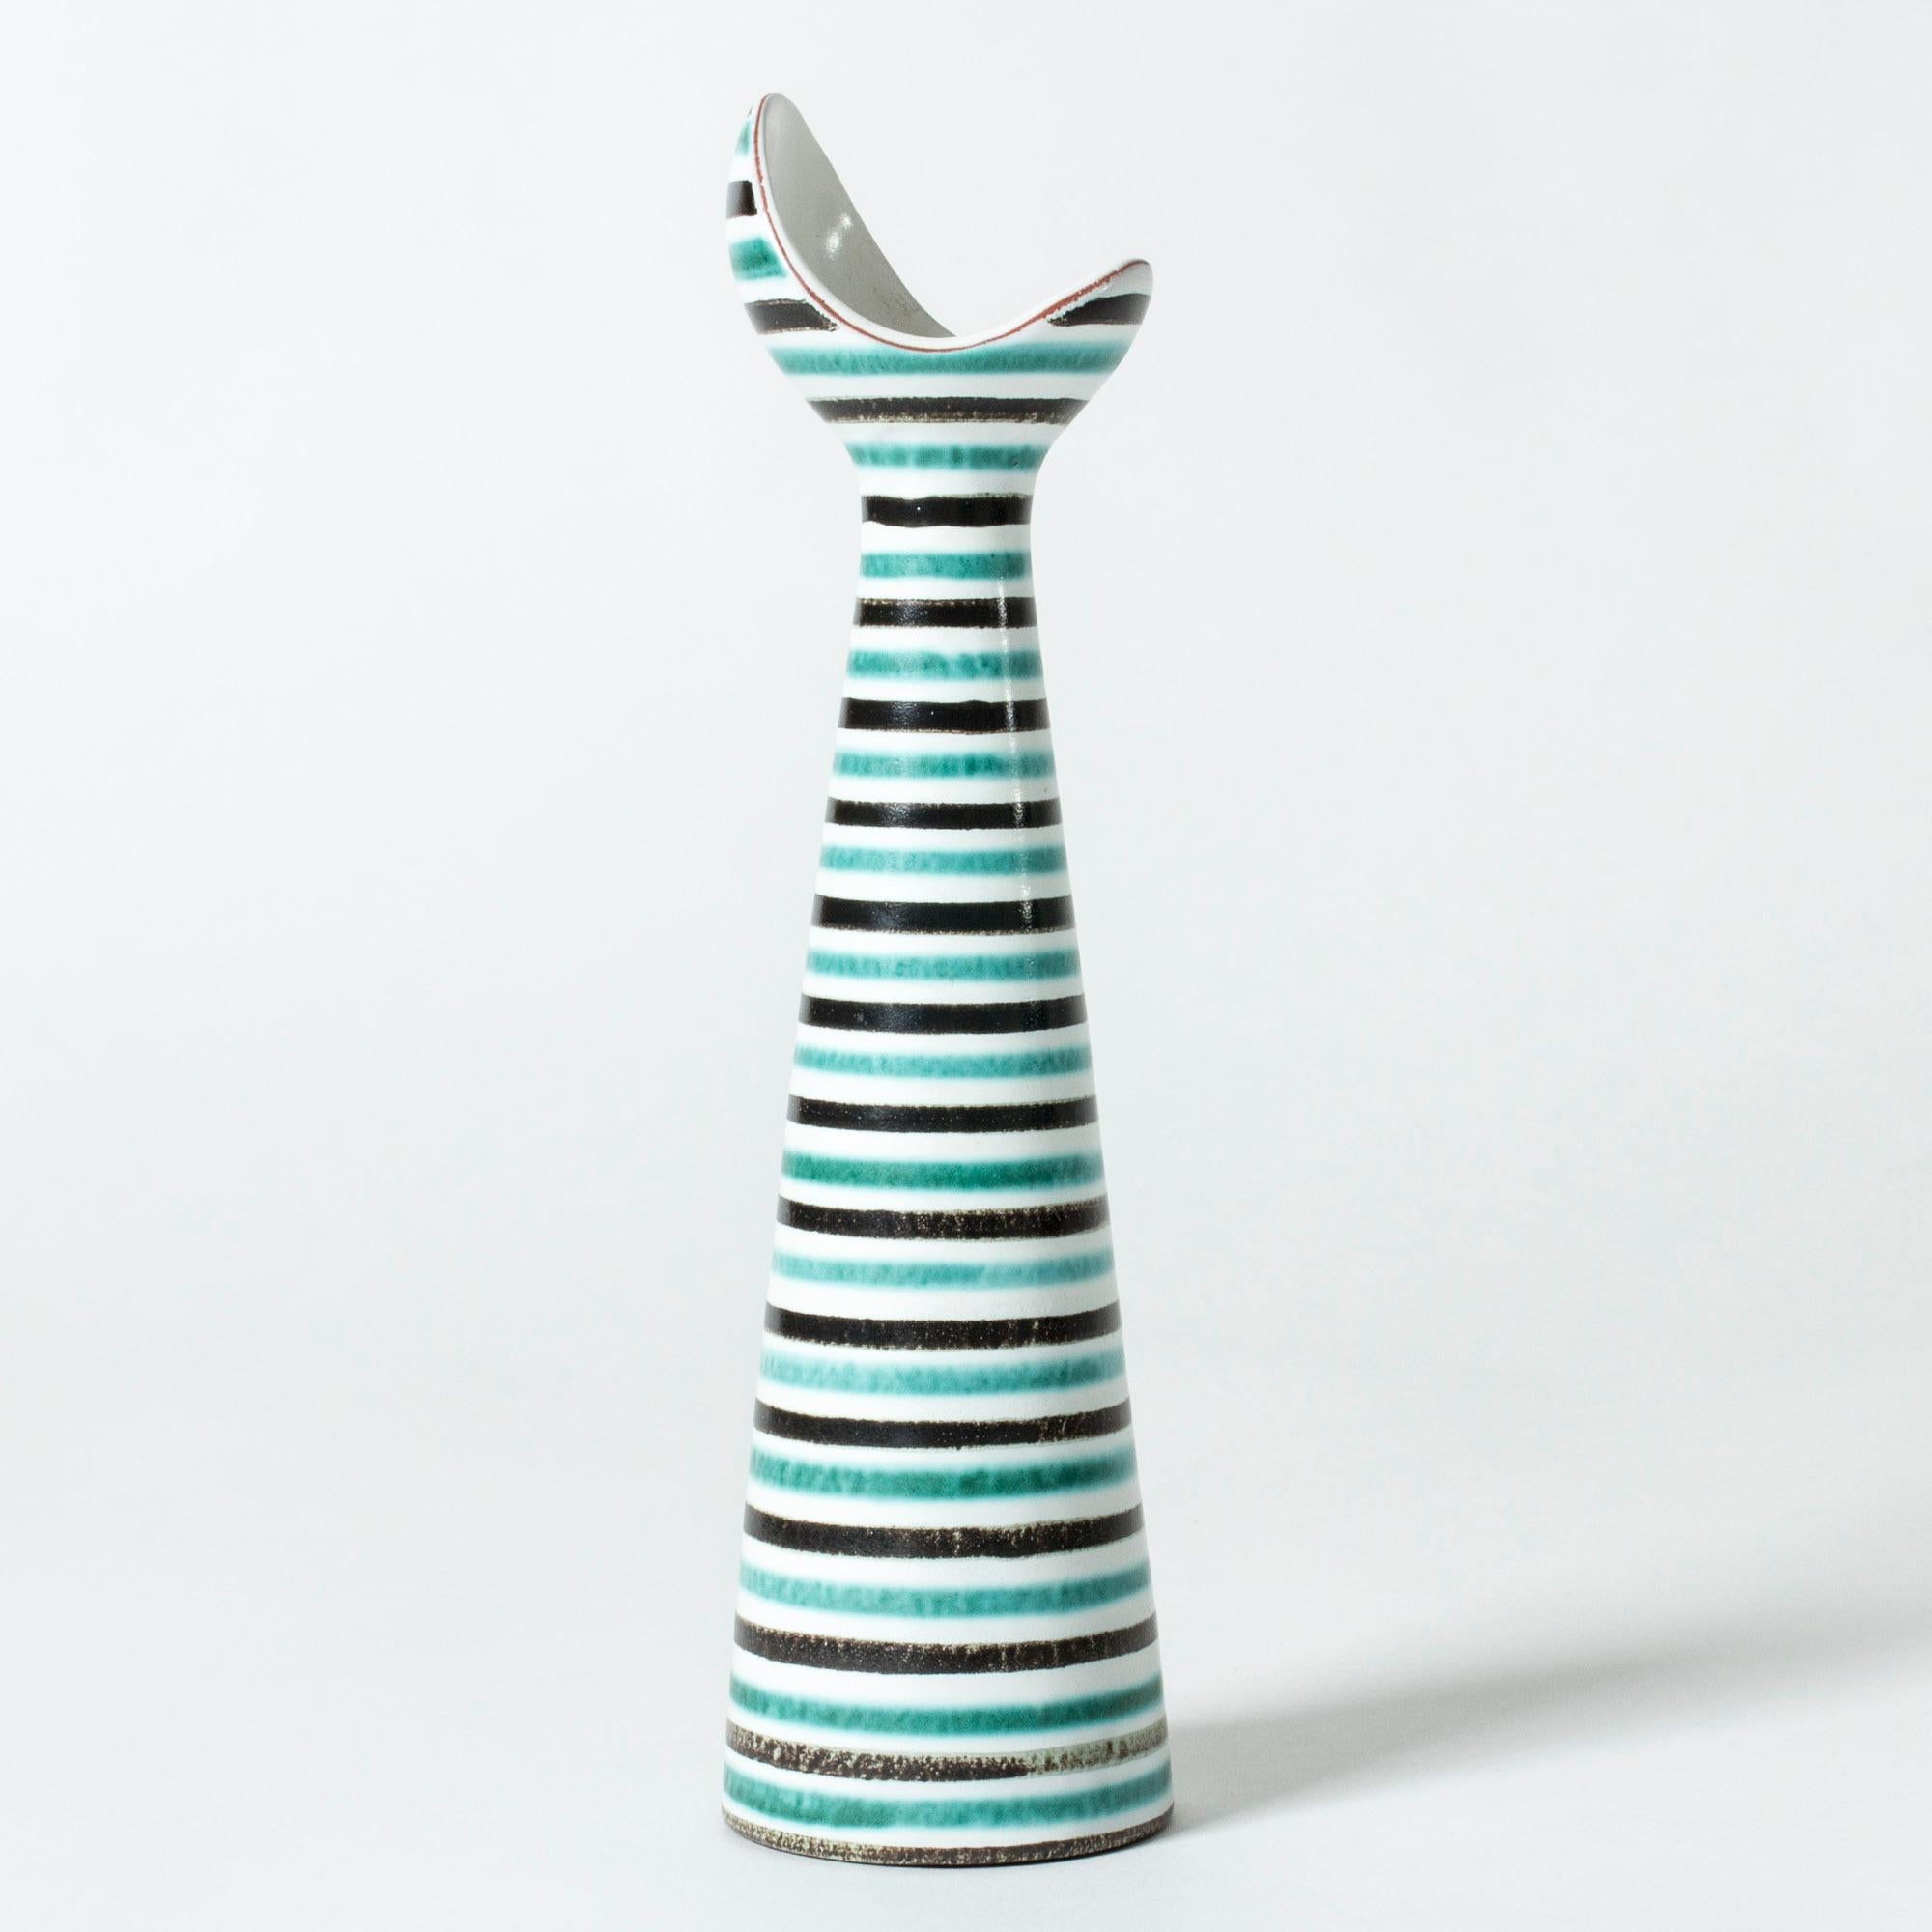 Cool faience vase by Stig Lindberg, in an asymmetrical, fun form. Graphic, hand-painted pattern of black and aquamarine stripes.